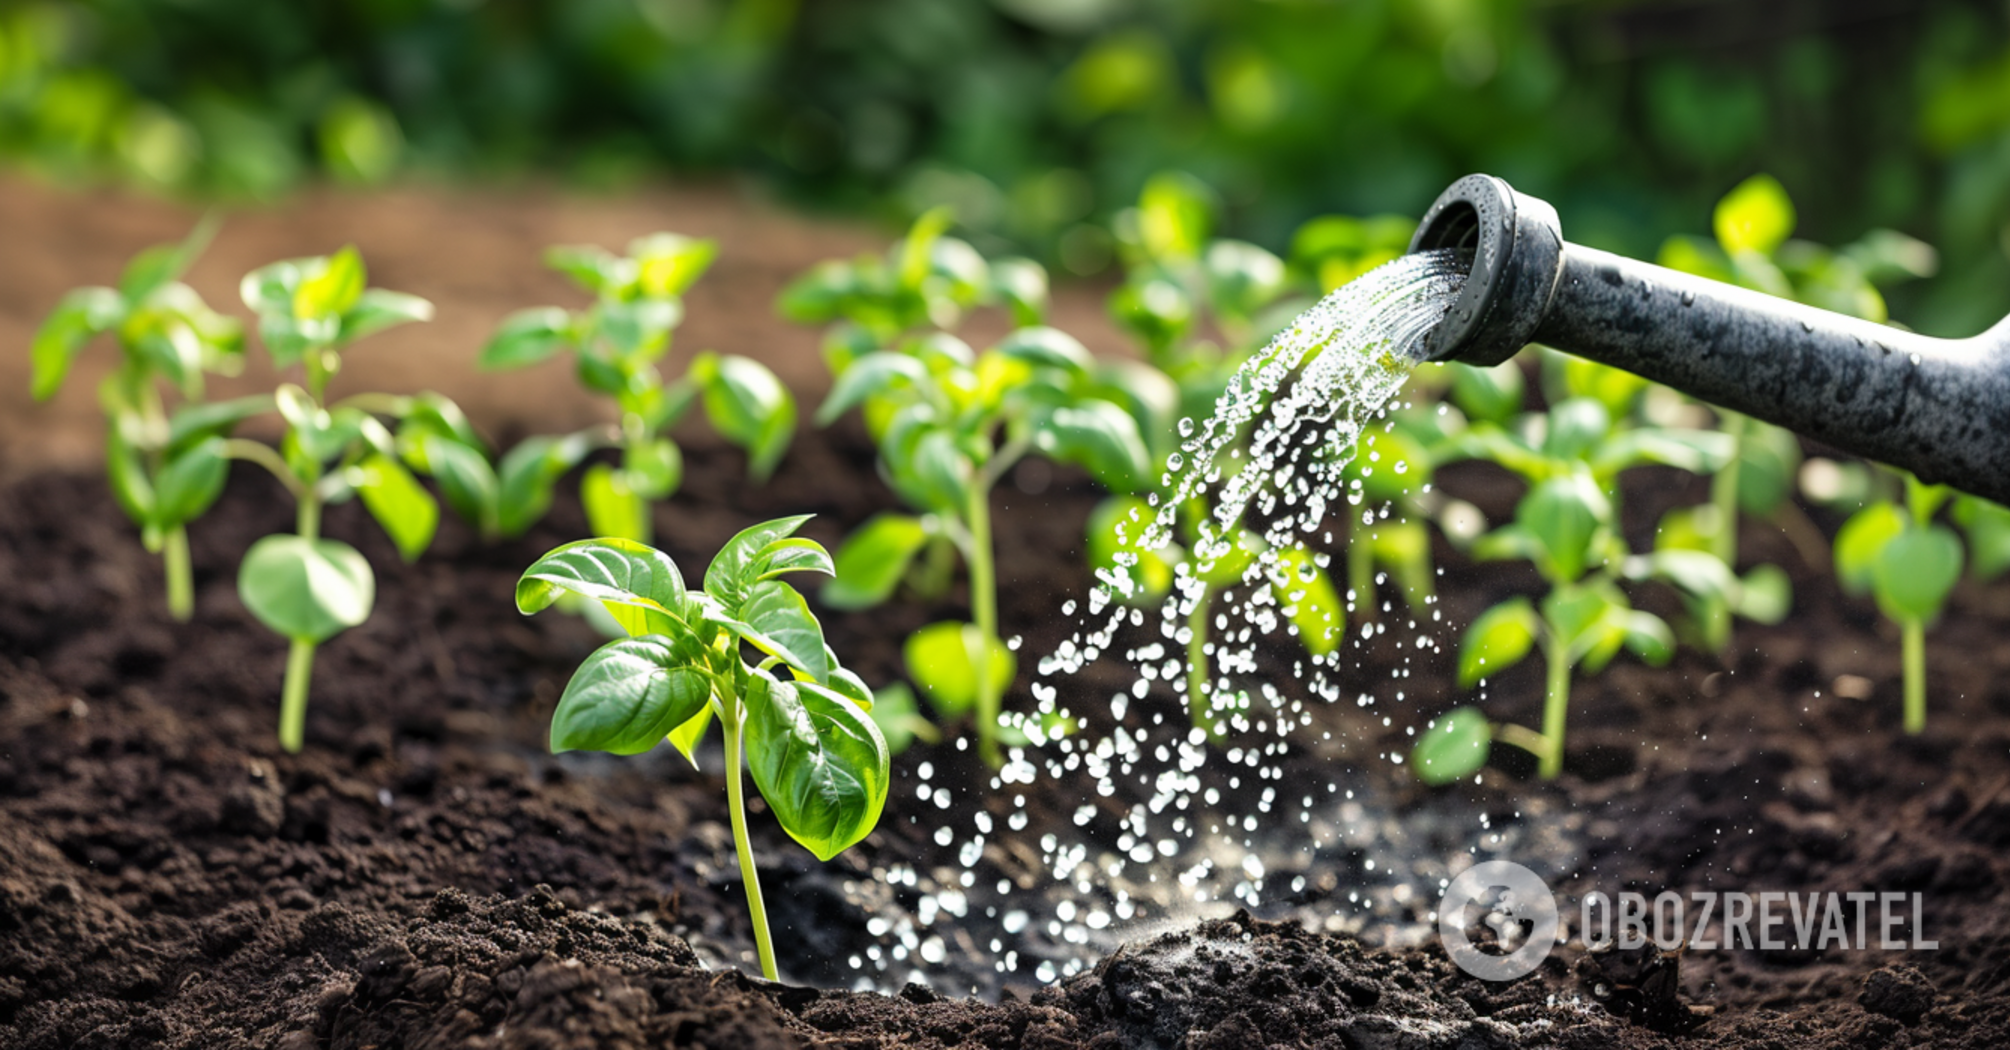 A mistake in watering plants can kill them: summer tips for garden